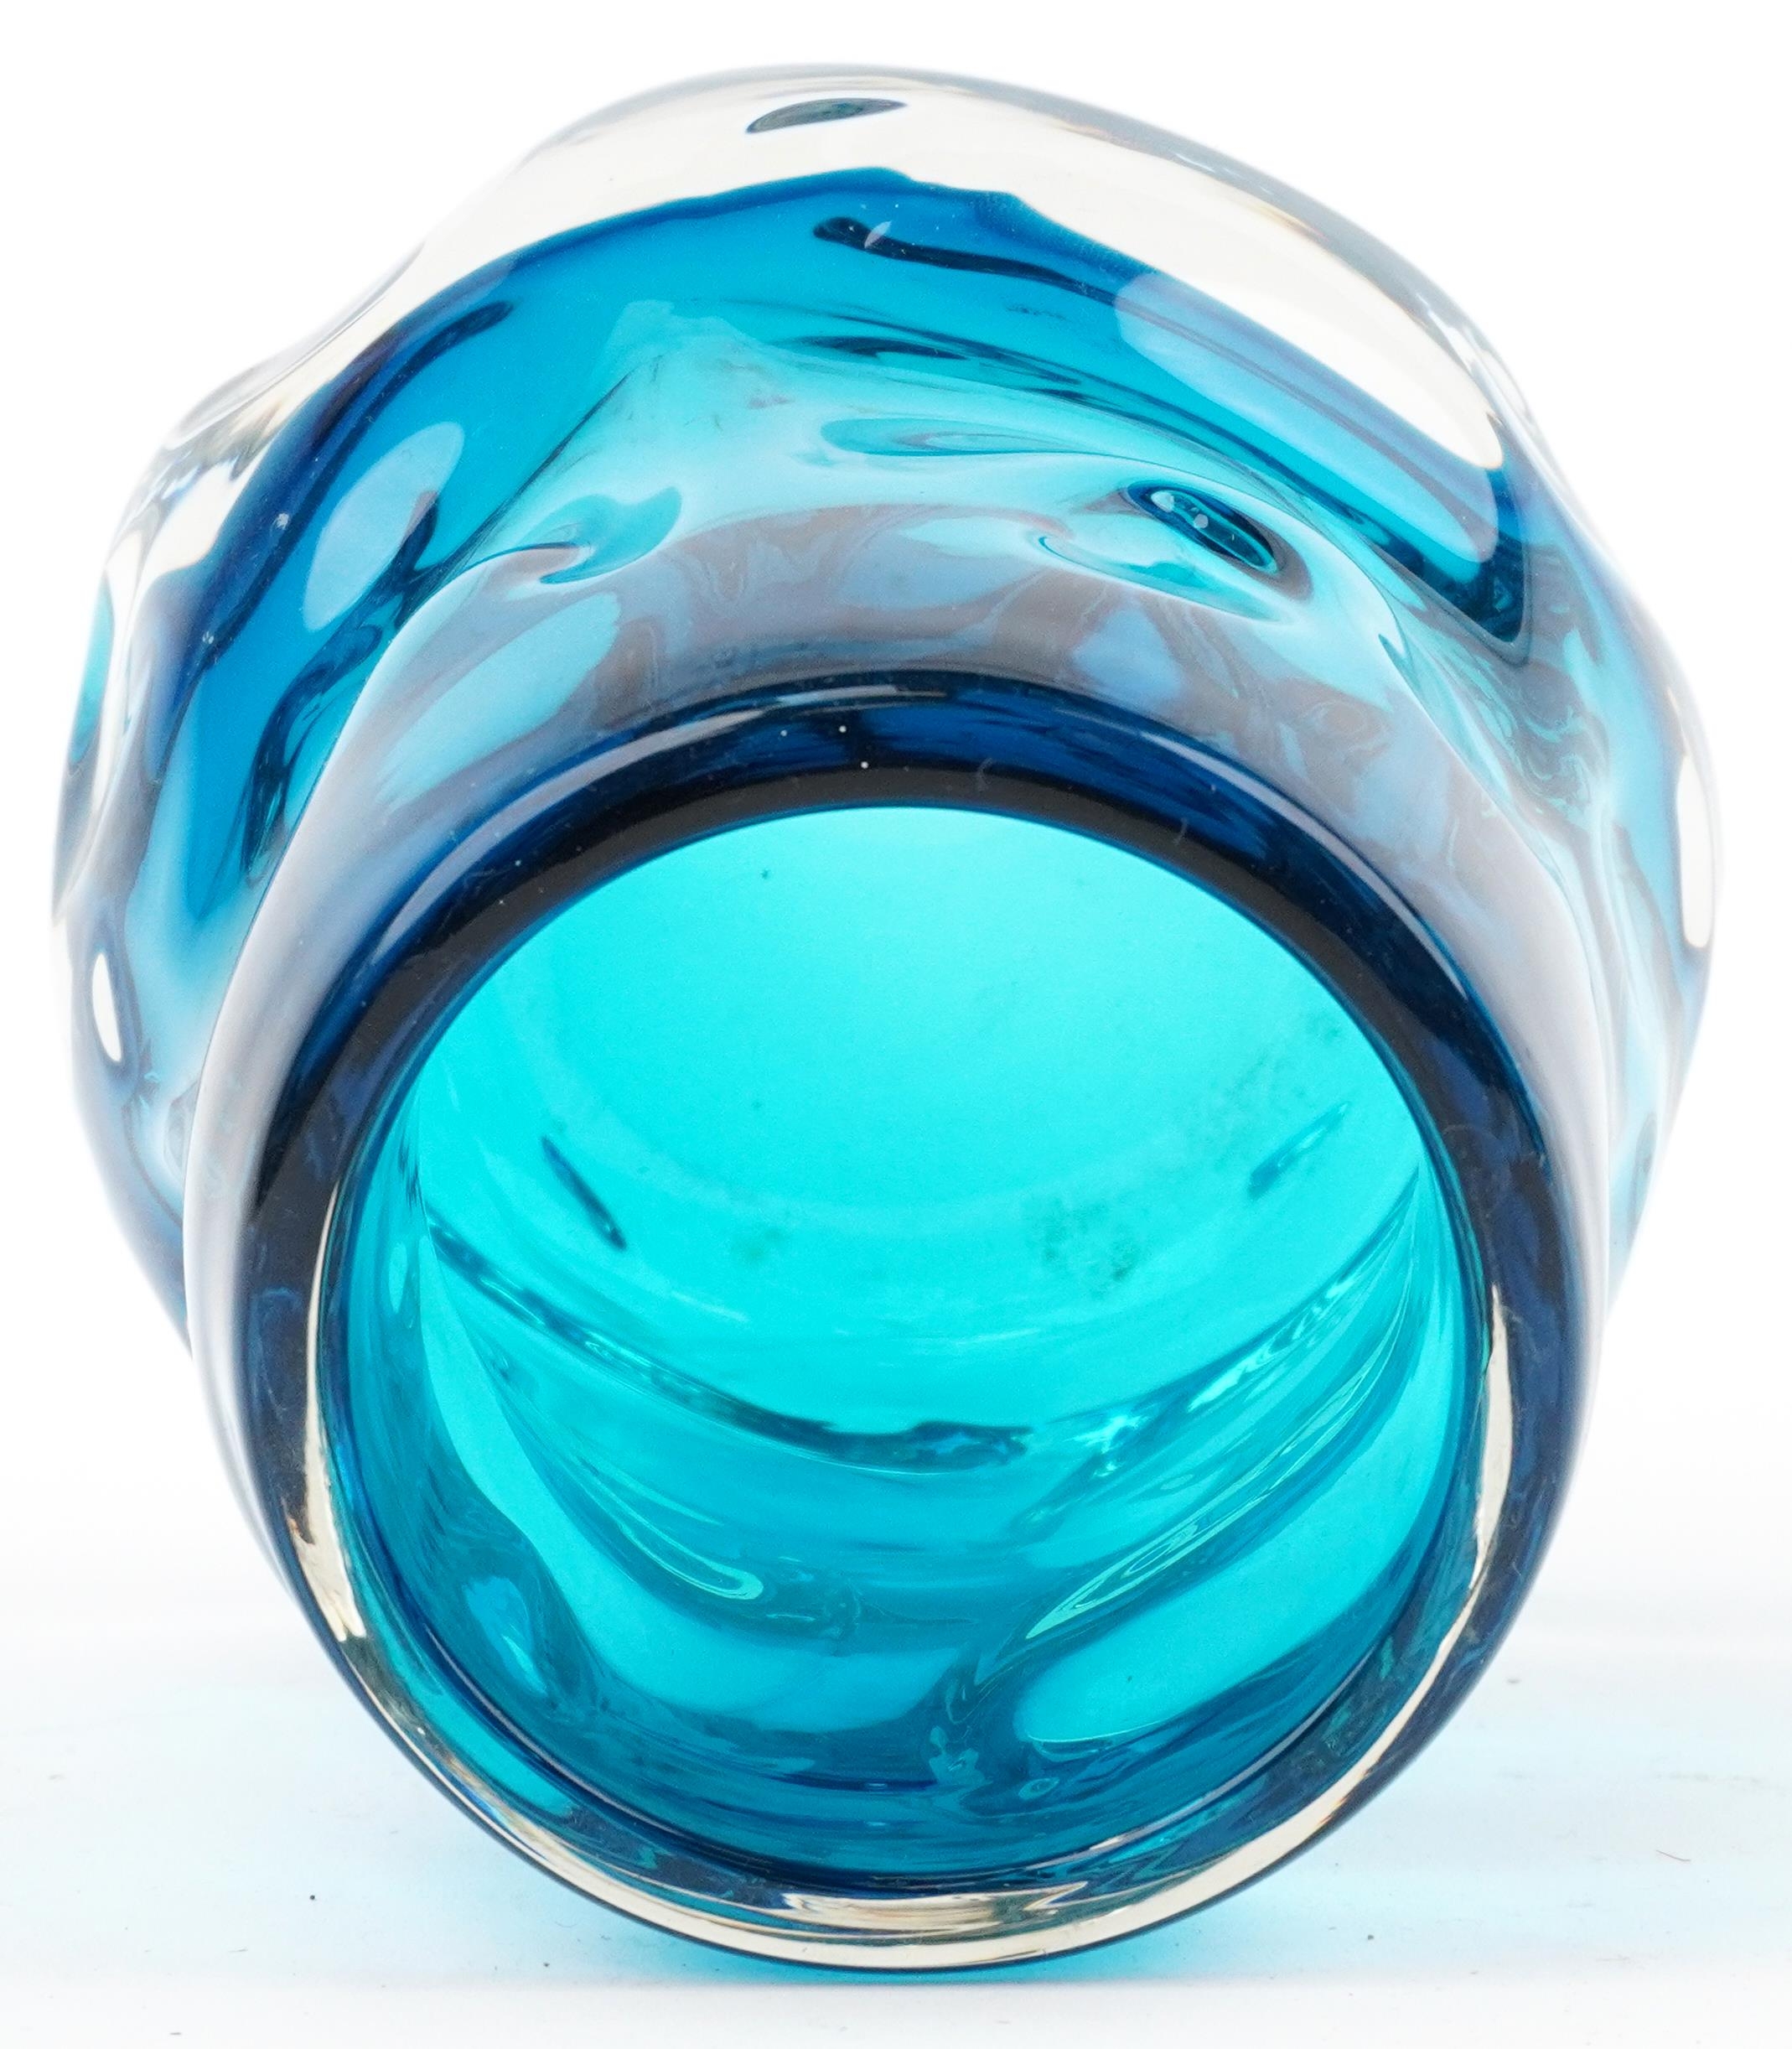 Geoffrey Baxter for Whitefriars, knobbly glass vase in kingfisher blue, 22.5cm high - Image 3 of 4